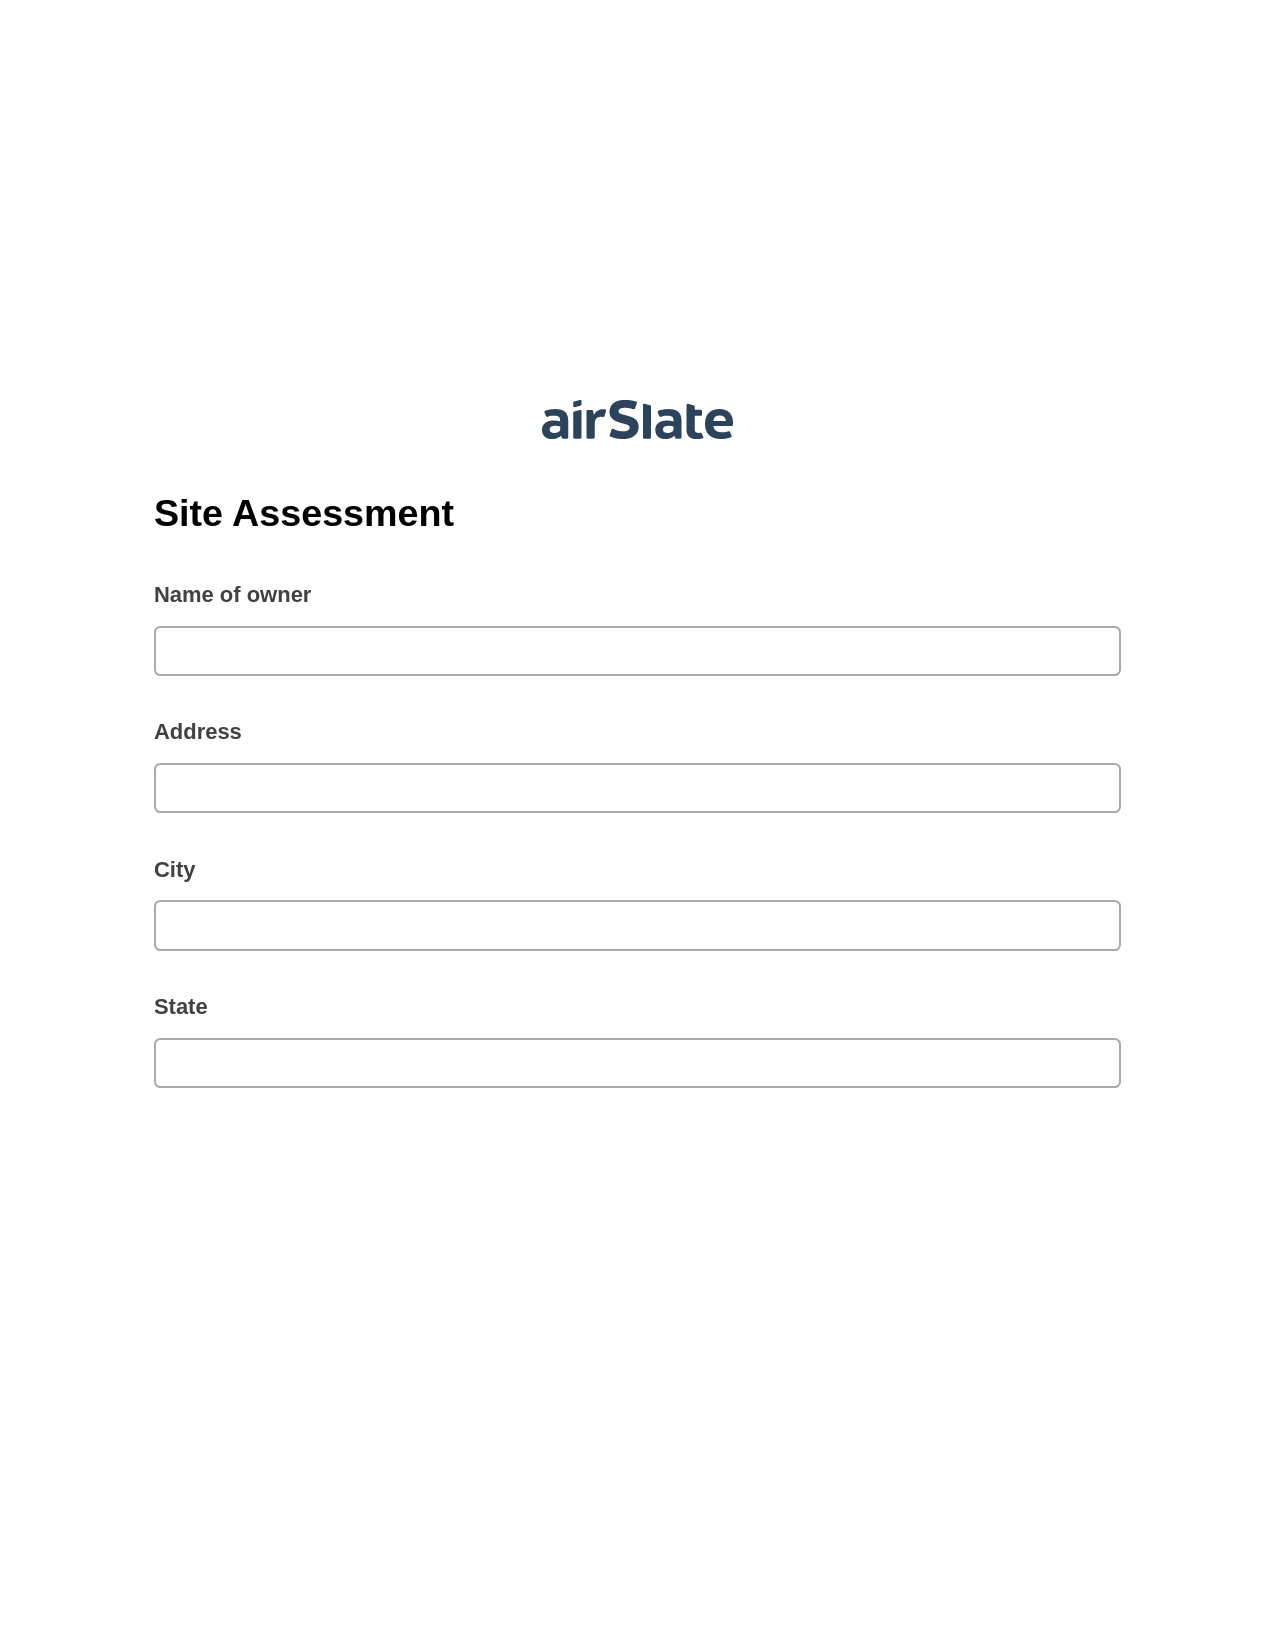 Site Assessment Pre-fill from Google Sheets Bot, Document Hide Bot, Google Drive Bot